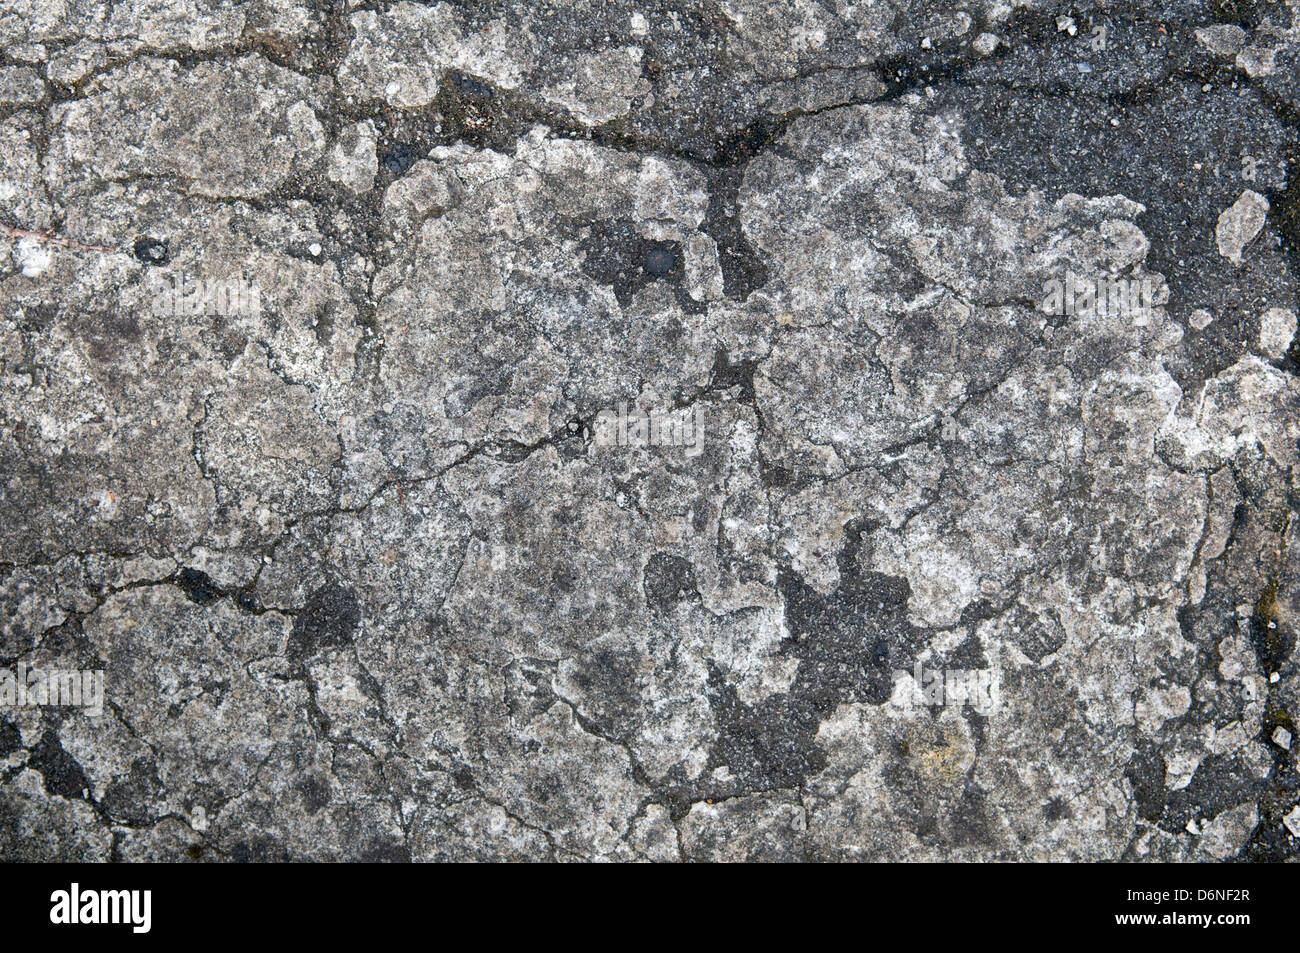 Close up of stone path showing textures and patterns Stock Photo